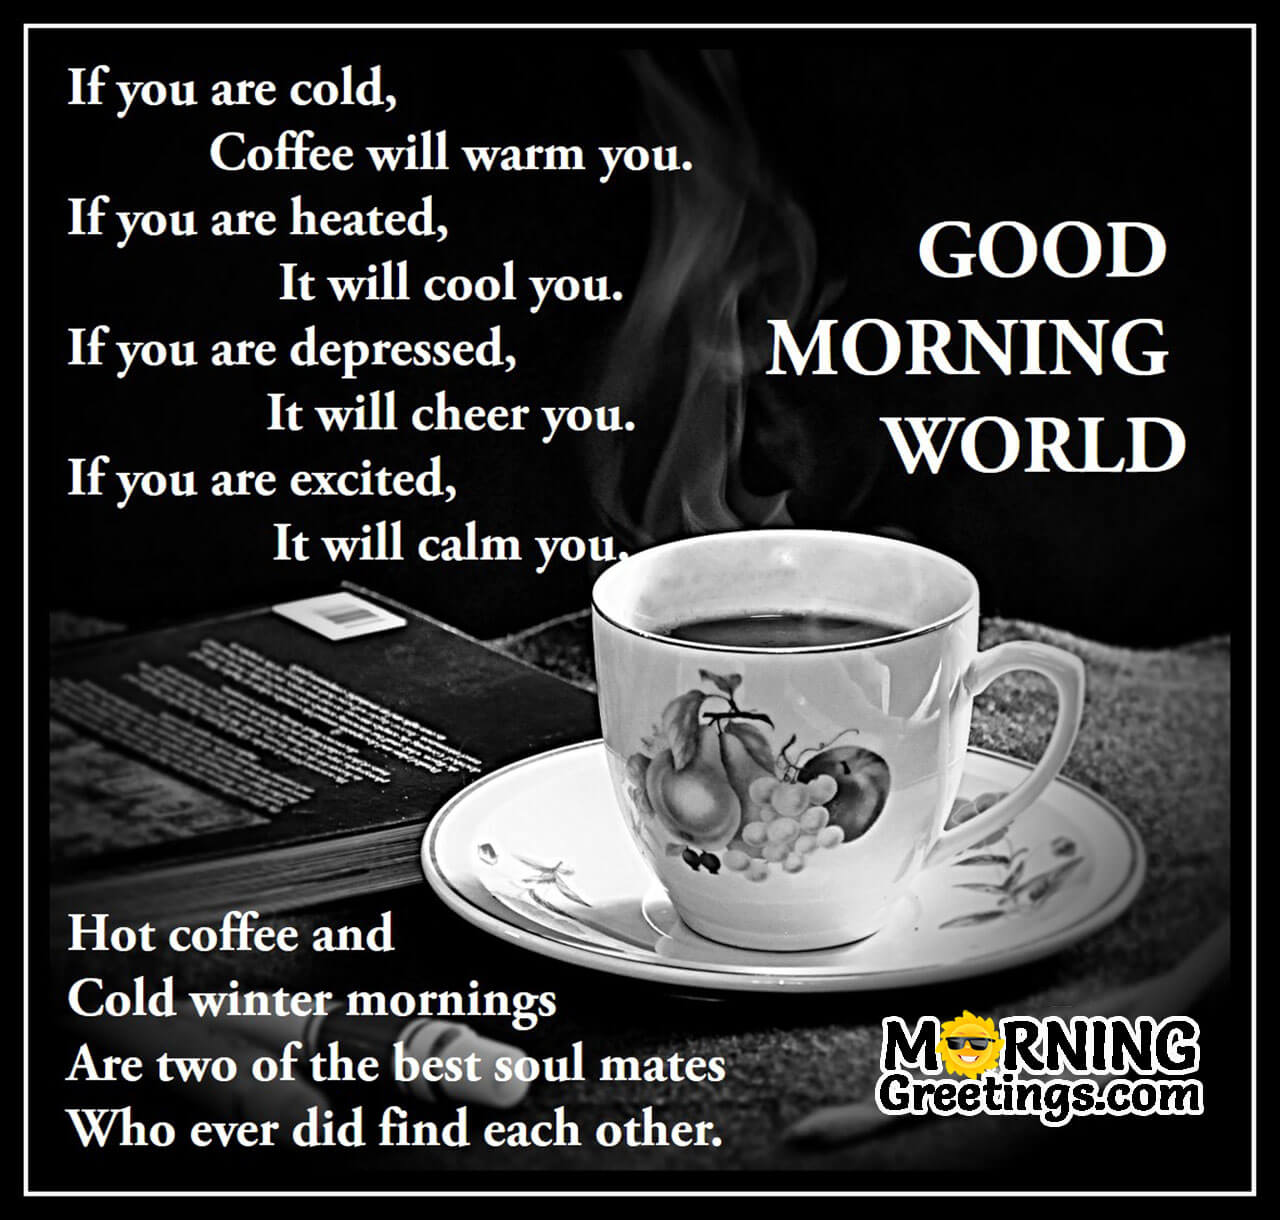 10 Brilliant Morning Coffee Quotes - Morning Greetings – Morning Quotes